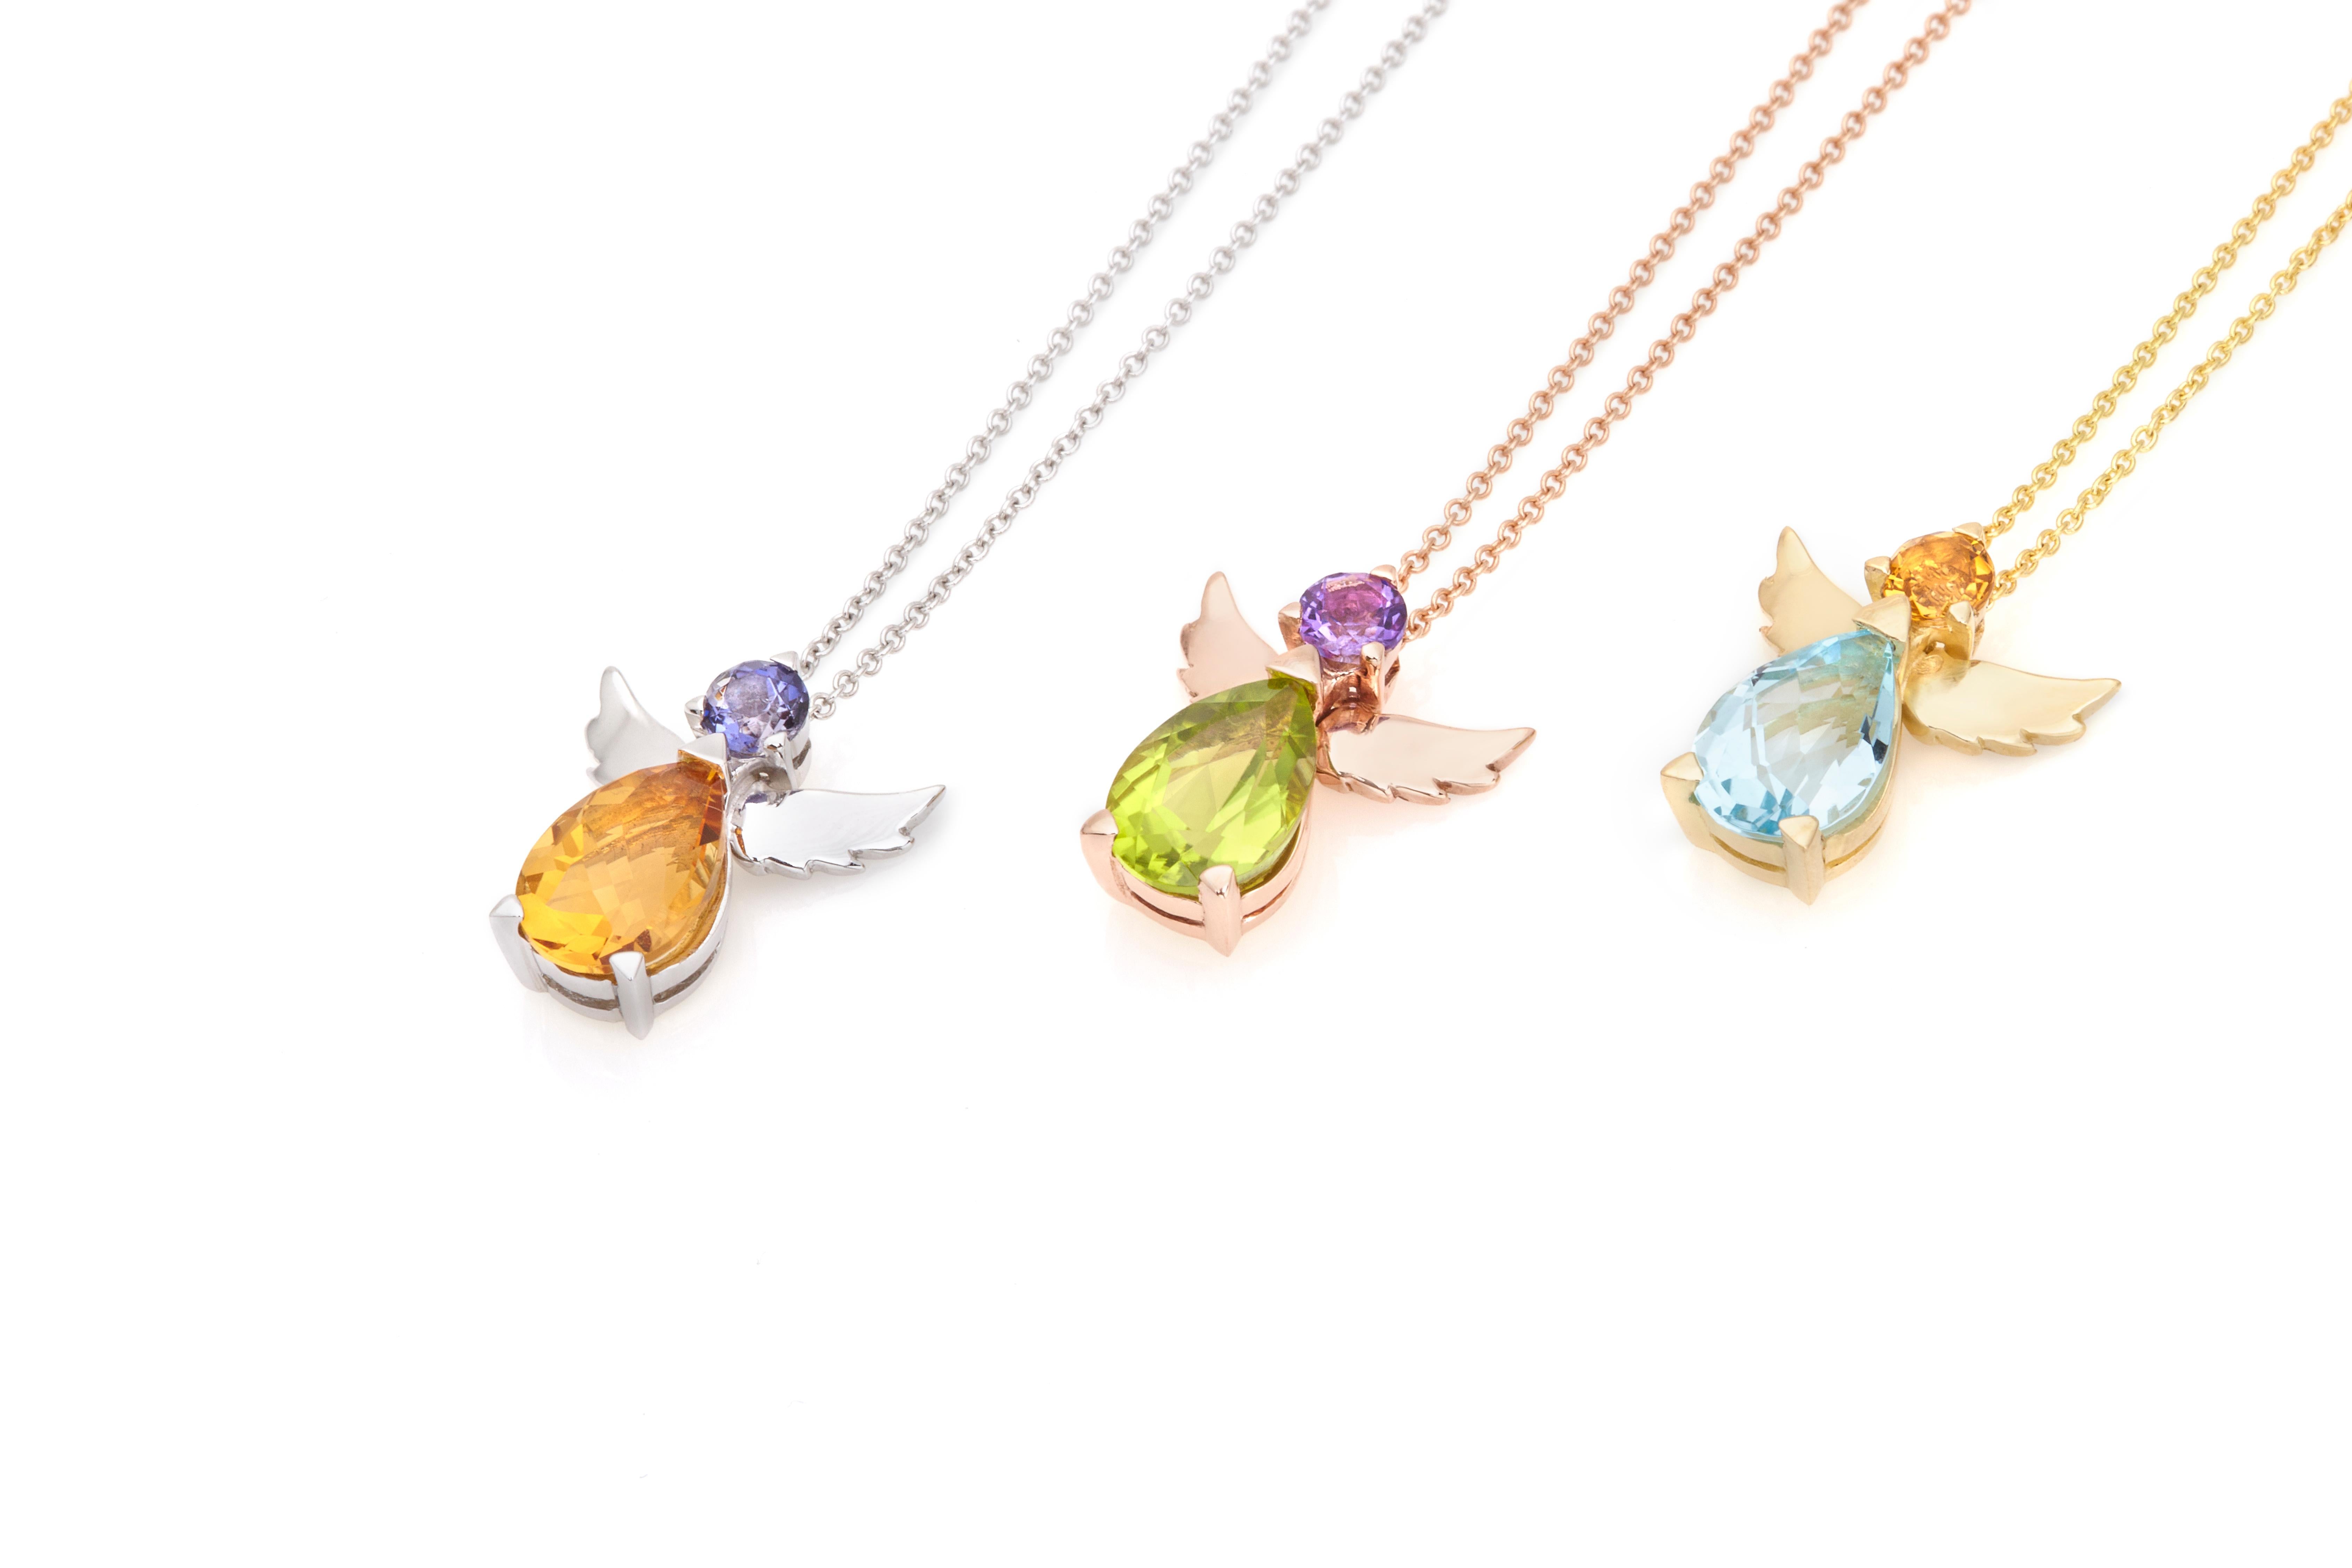 Guardian Angel Pendant Necklace in 18kt Rose Gold with Round Purple  Αmethyst and Pear Green Peridot.
The angel is made of 18Kt rose gold, purple amethyst and green peridot. It comes with an 18Kt rose gold rolo chain, 16 inches long. The pendant